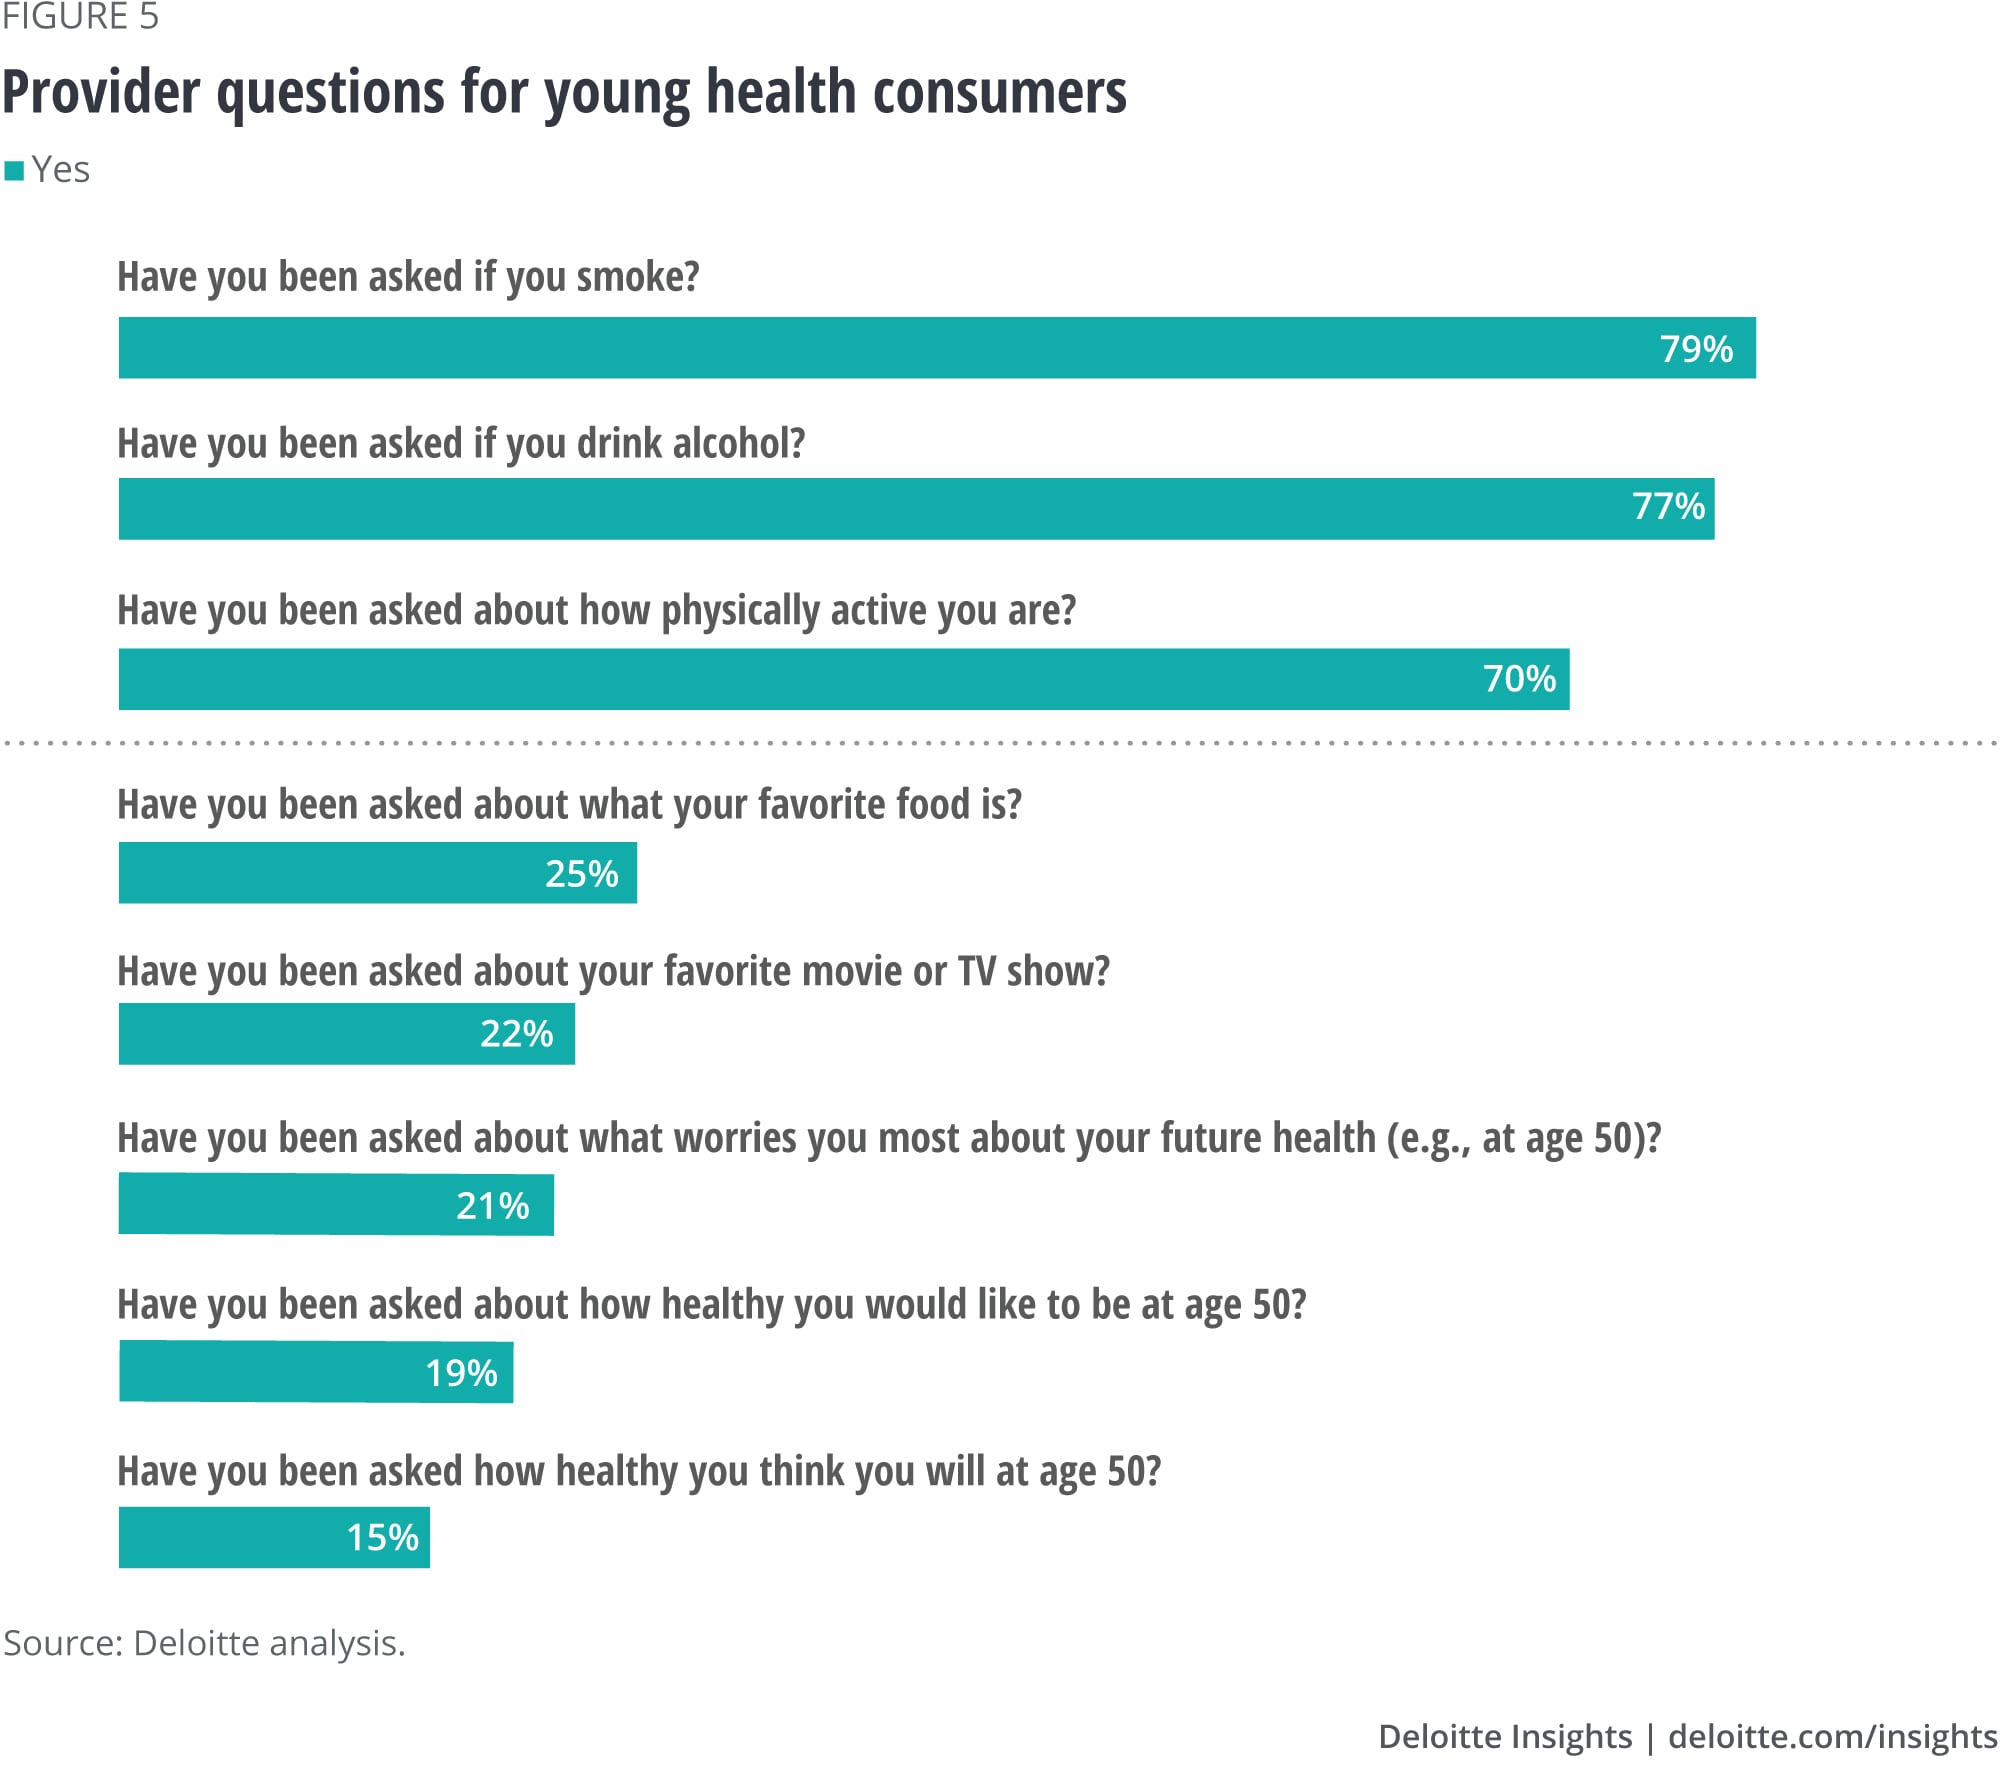 Provider questions for young health consumers